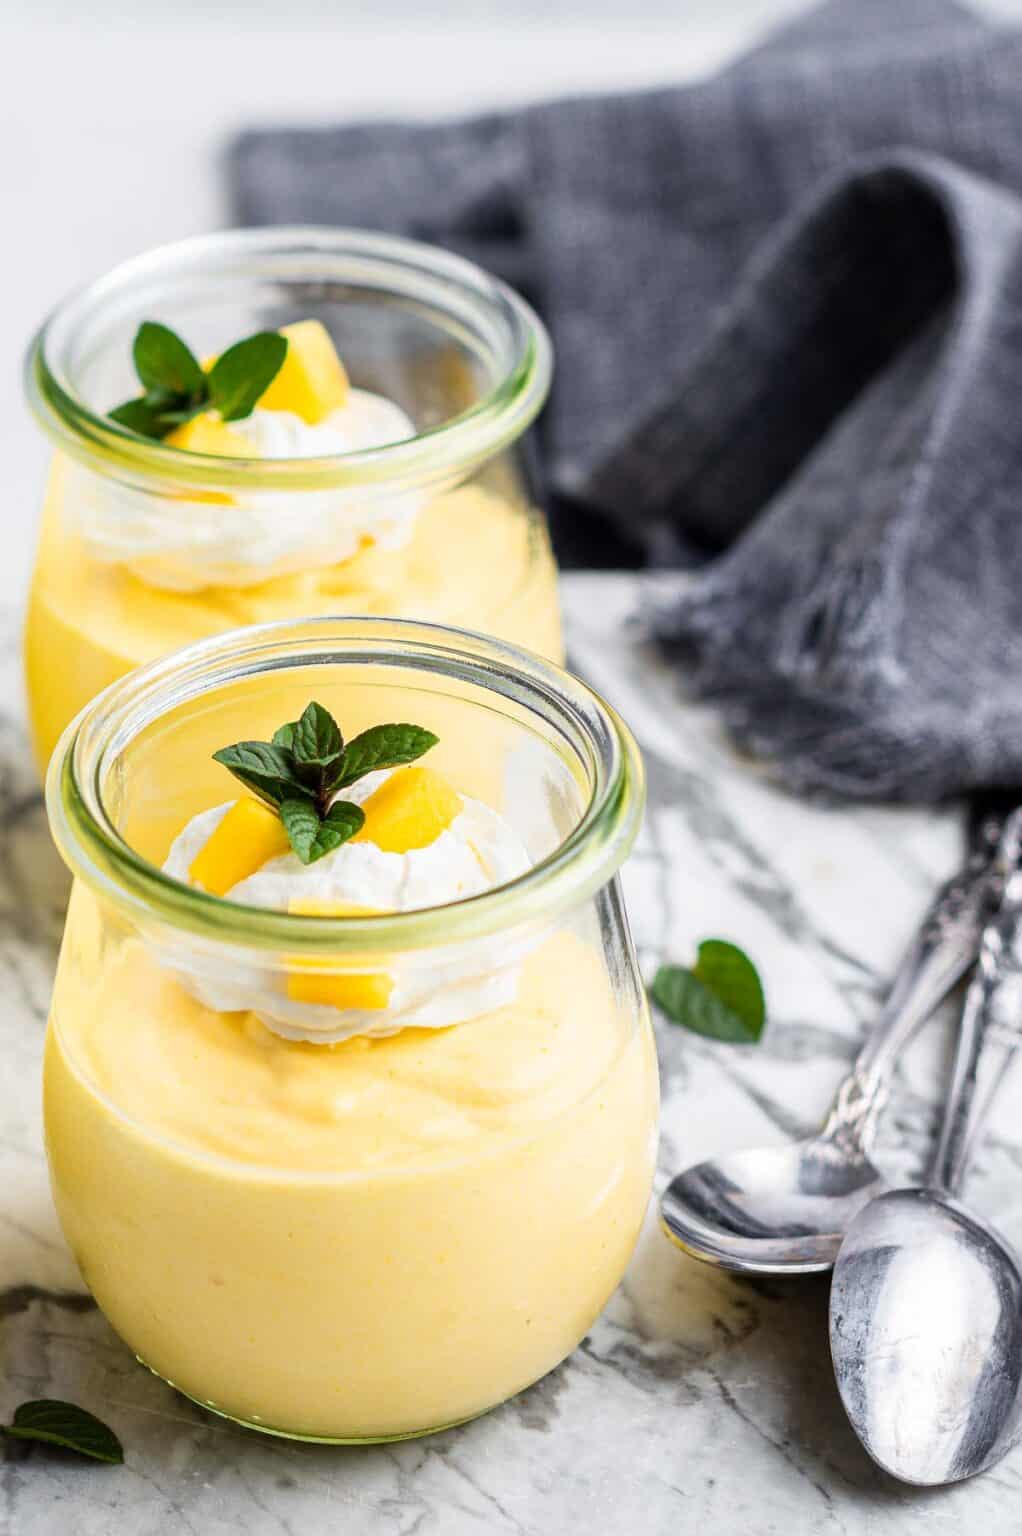 Creamy Mango Mousse Dessert Cups - Dessert for Two